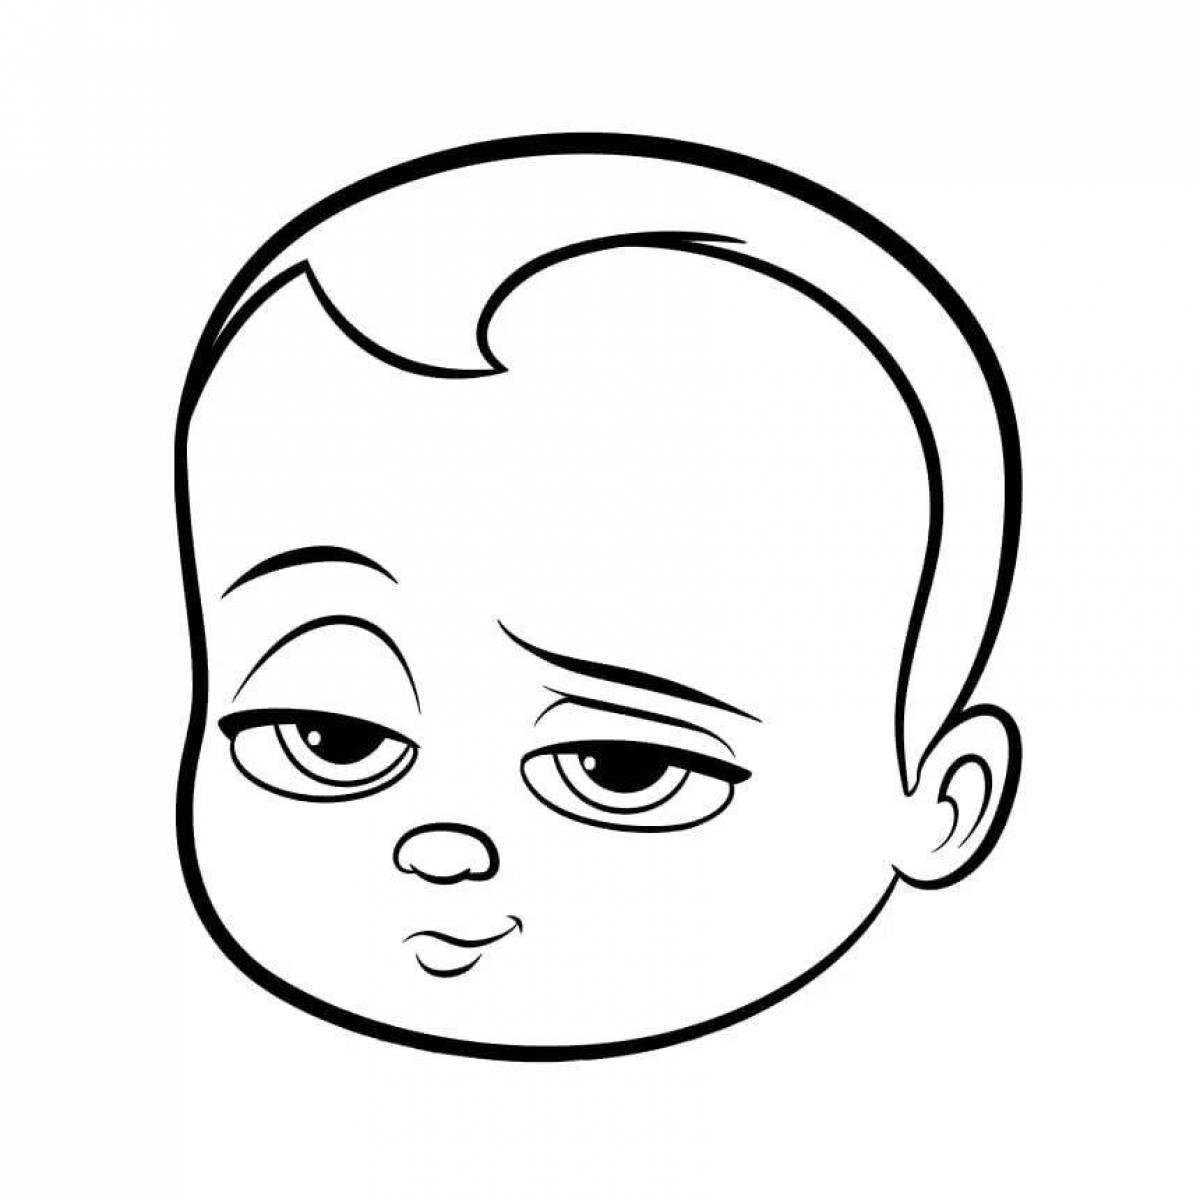 Playful human face coloring page for kids